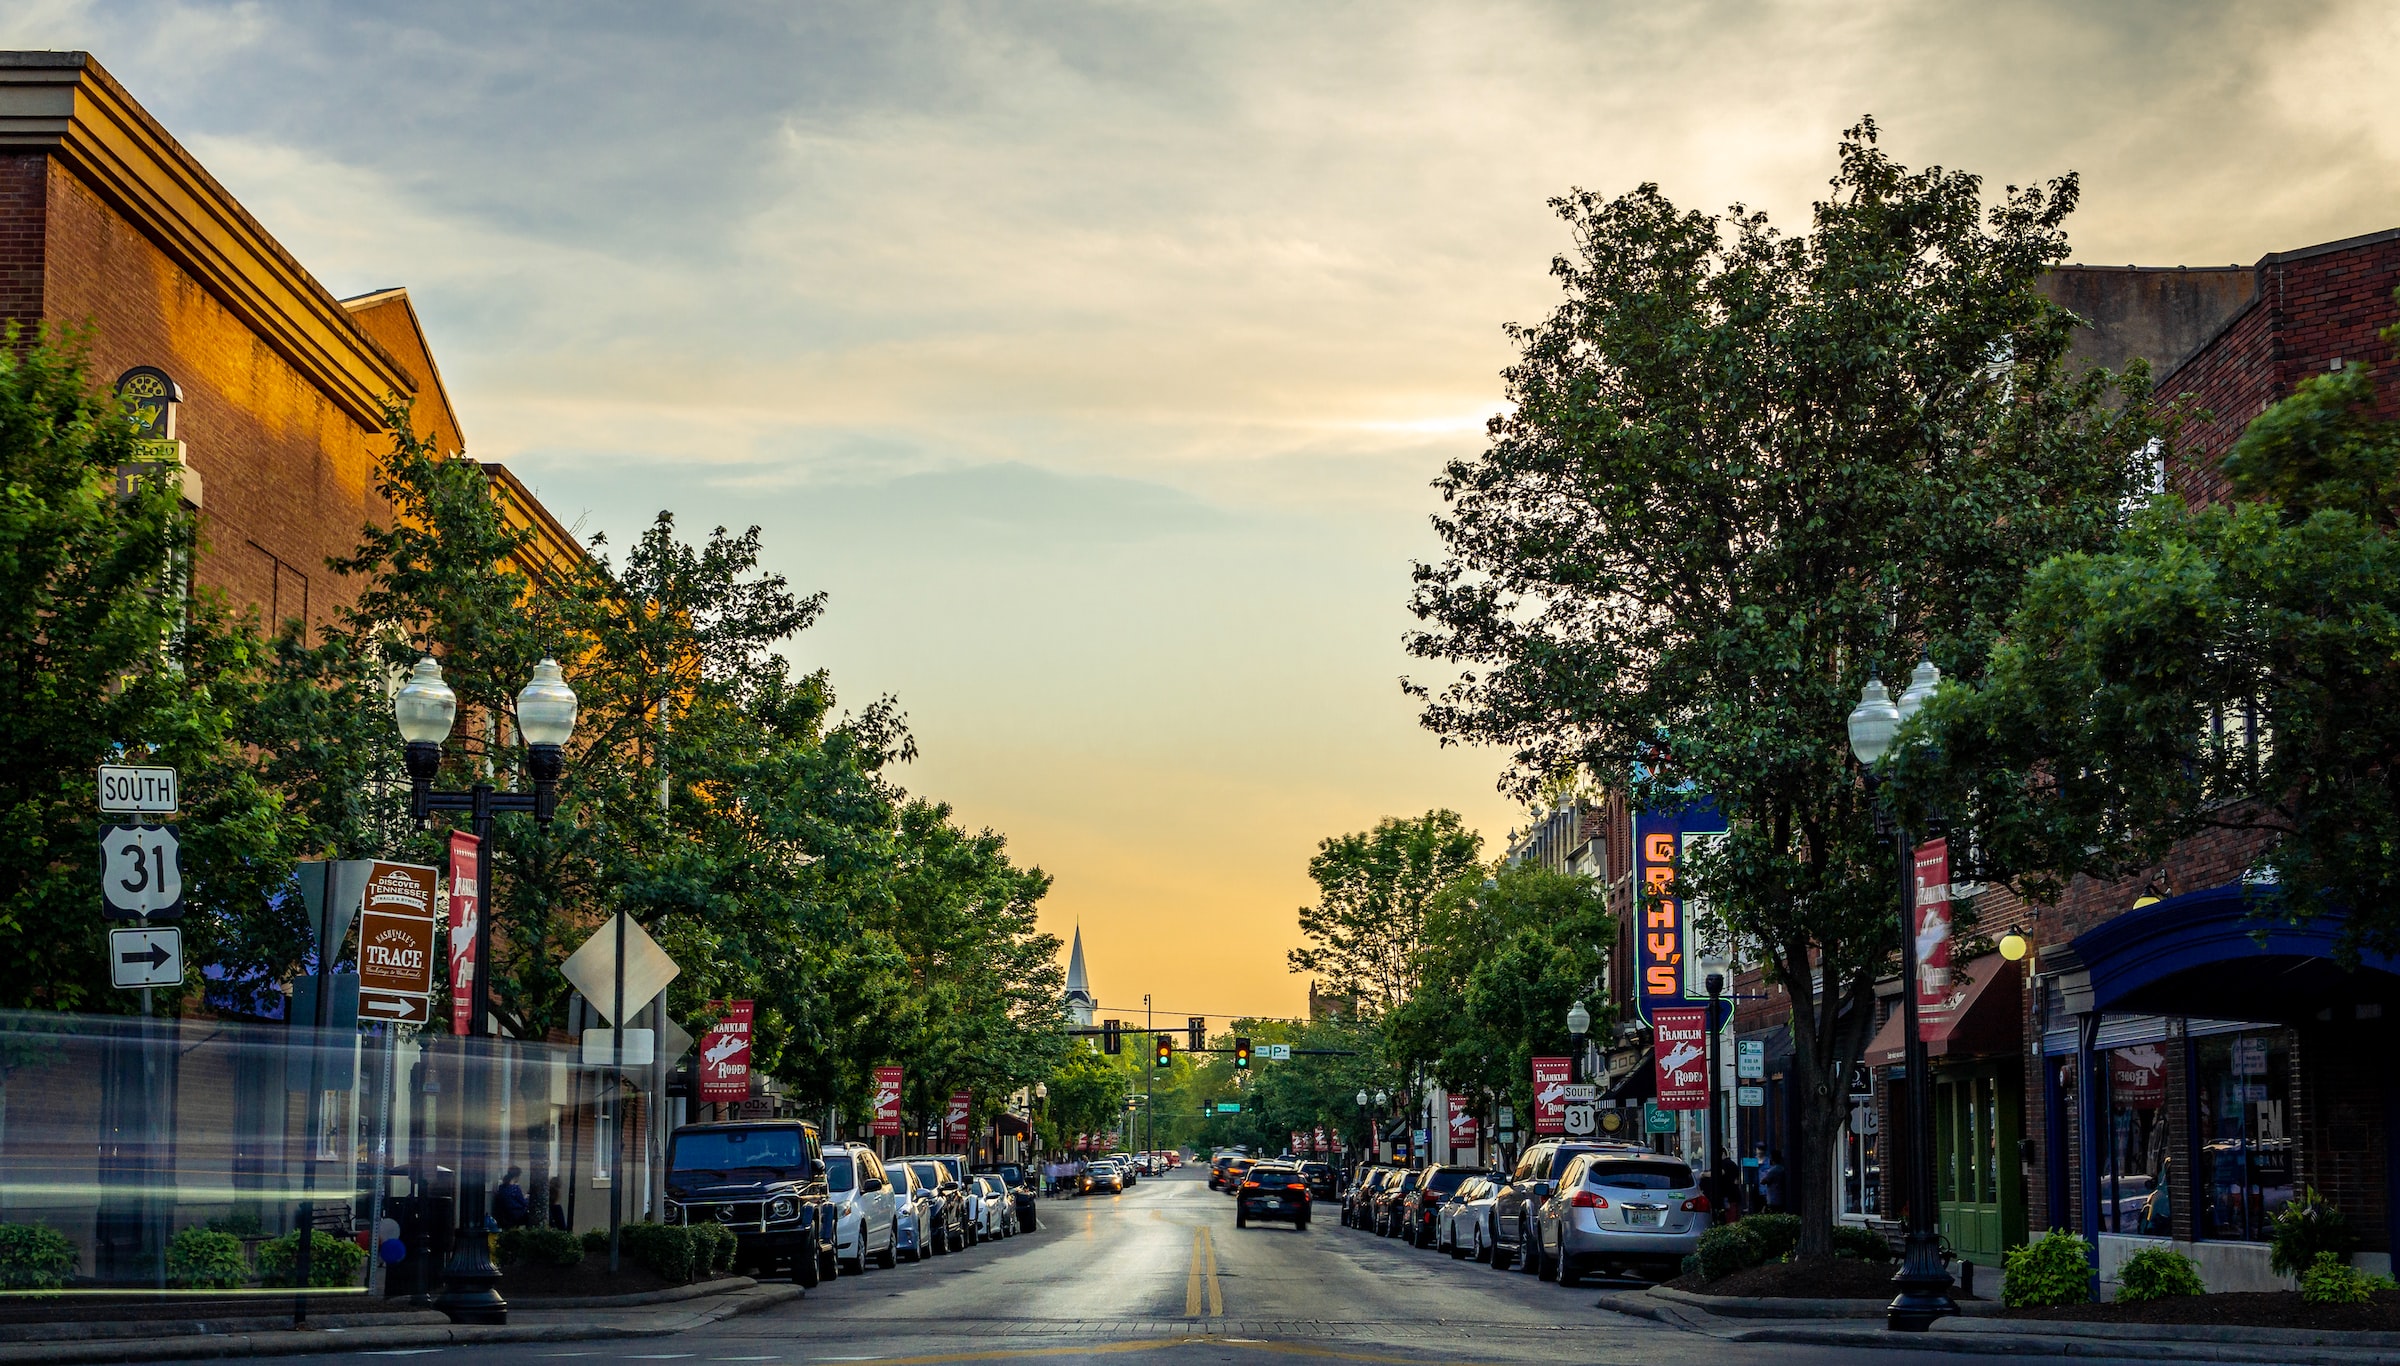 Downtown Franklin, Tennessee at sunset.